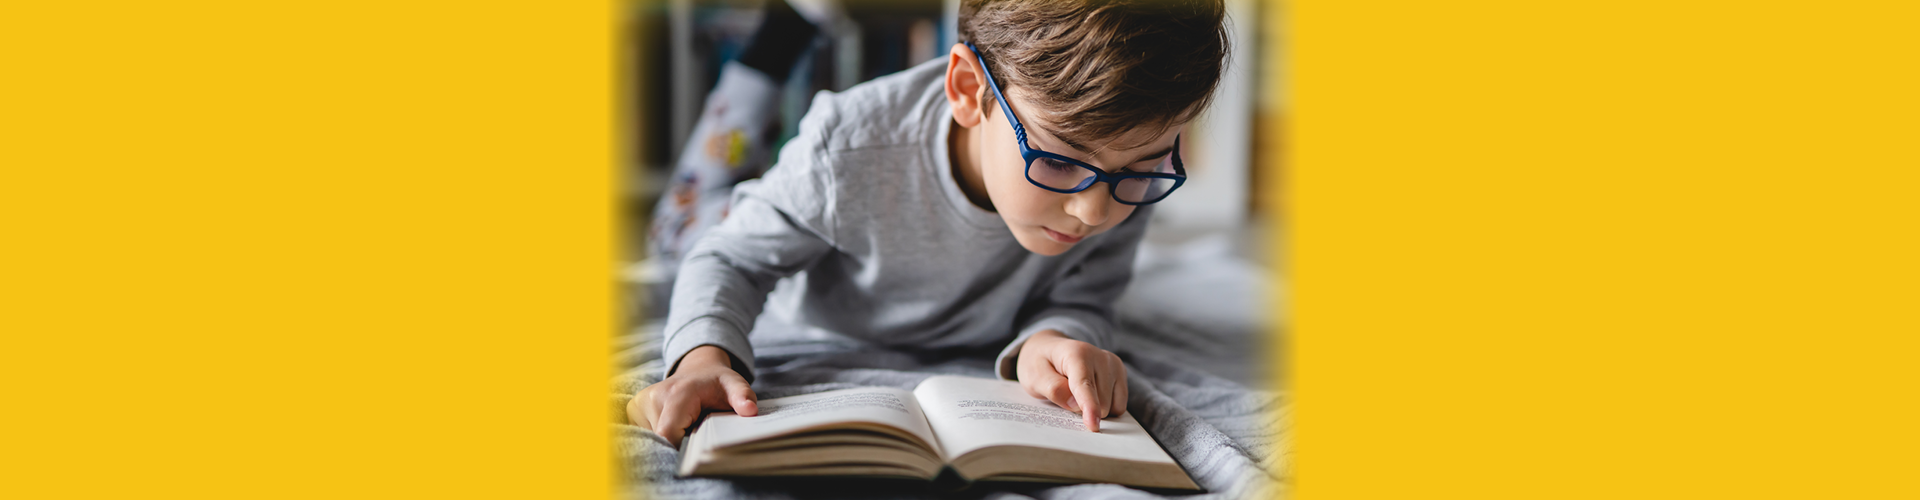 boy with glasses reading